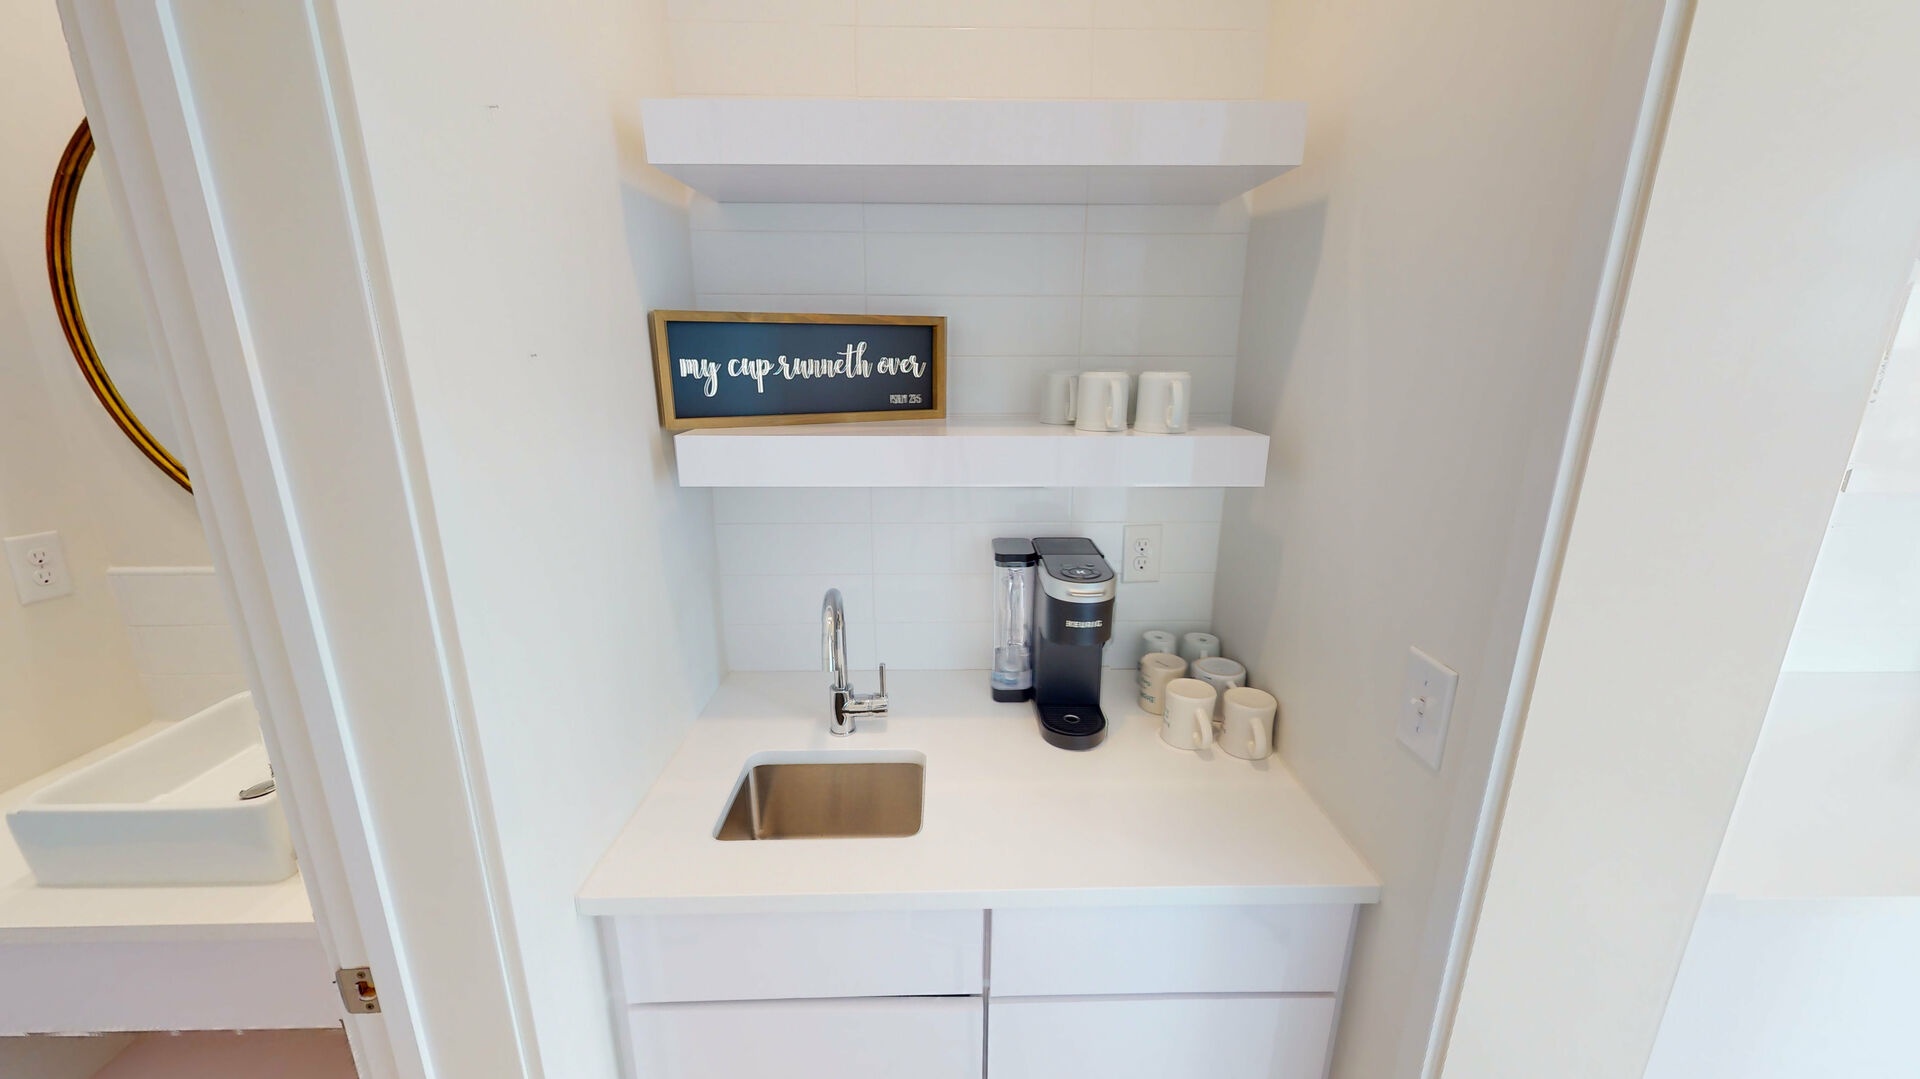 Separate coffee wet bar area